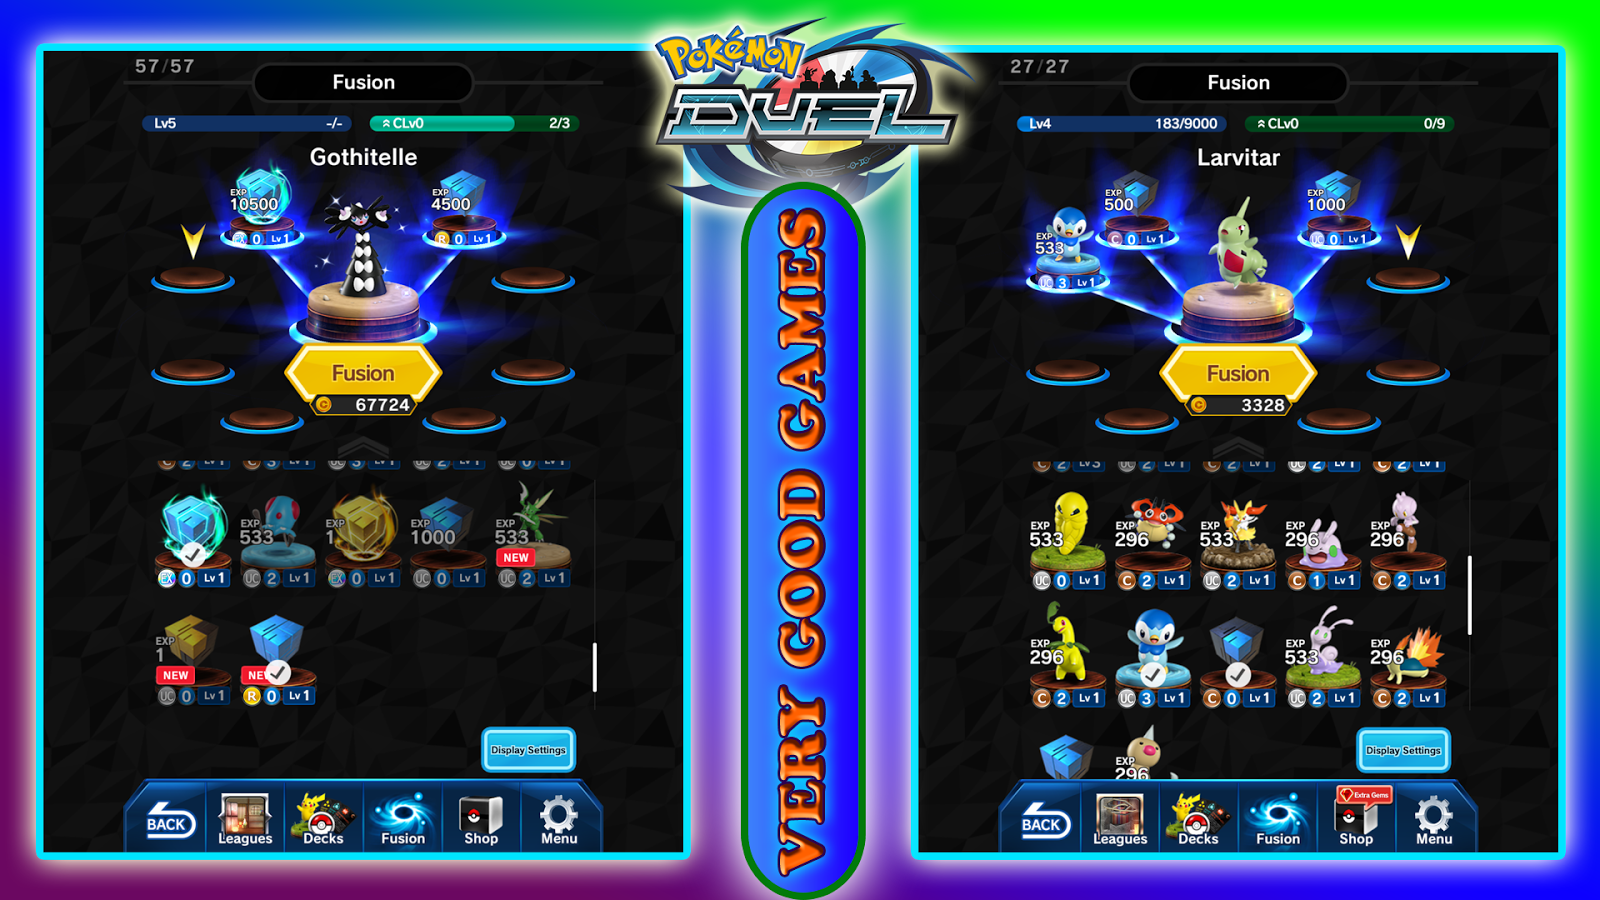 Tutorial - How to use coins in the Pokemon Duel game